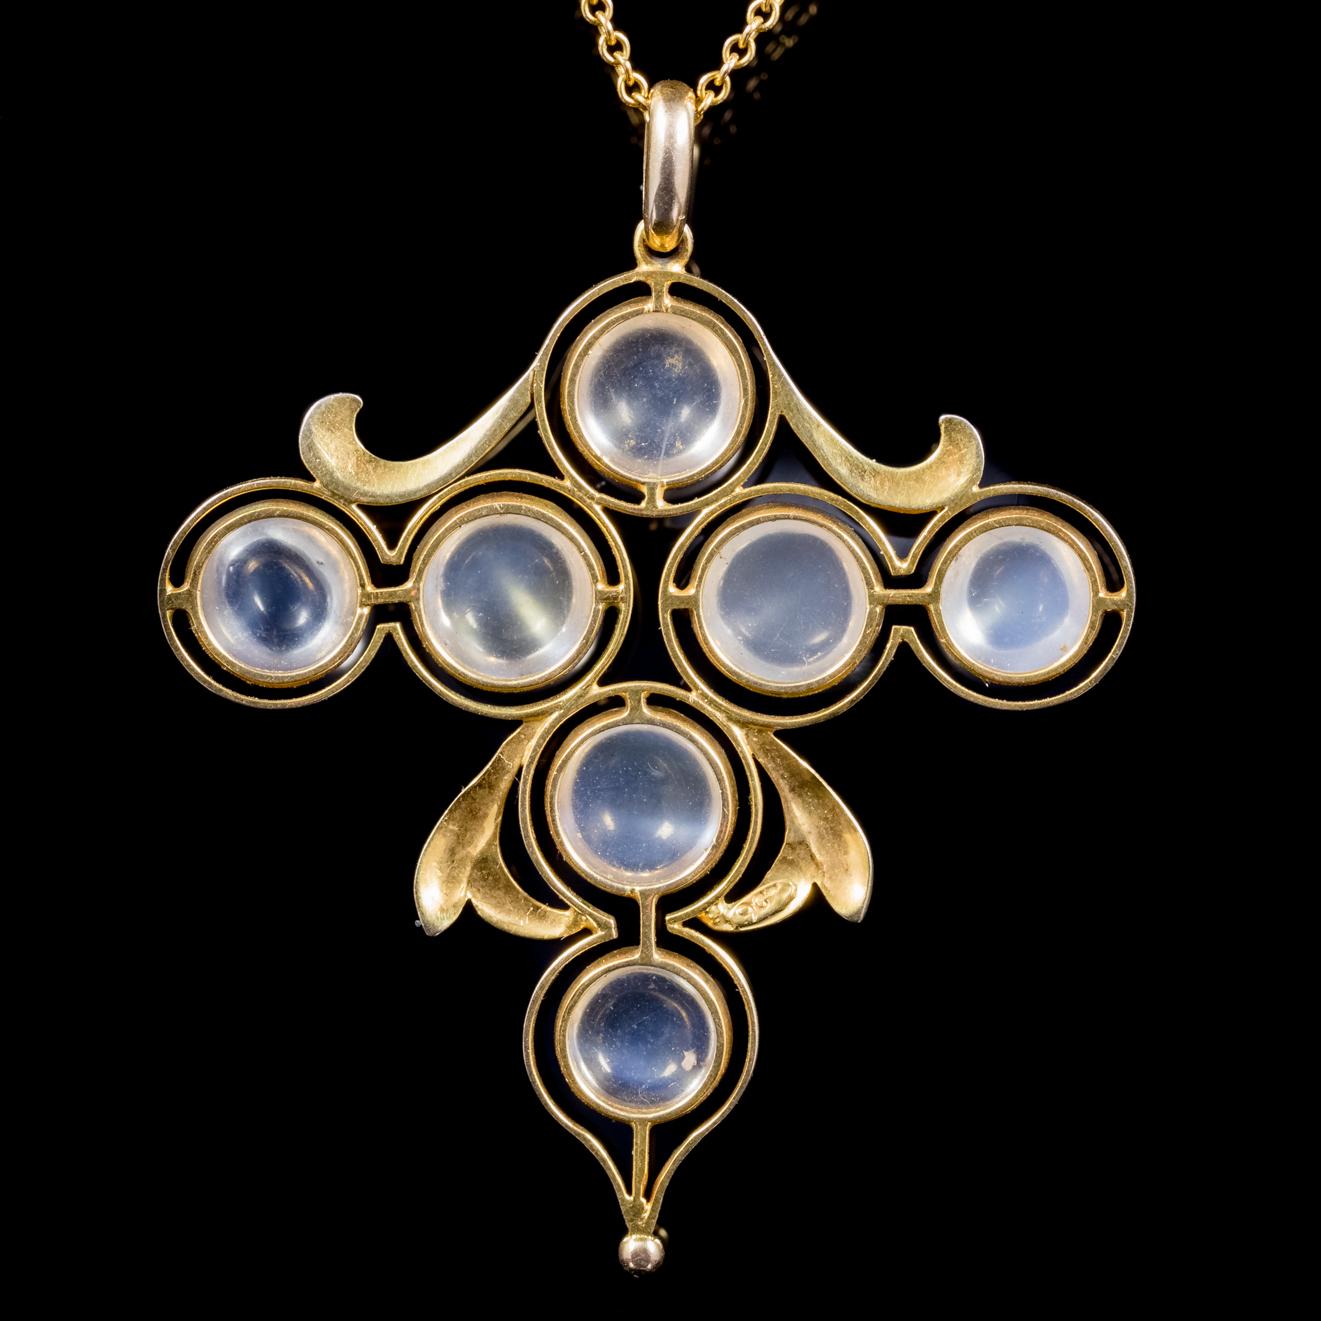 A fabulous antique Arts and crafts necklace C. 1900, featuring a cross pendant crowned with seven cabochon Moonstones which are approx. 1.50ct each. 

The Arts and Crafts movement breathed new life into the design of jewellery in the late 19th